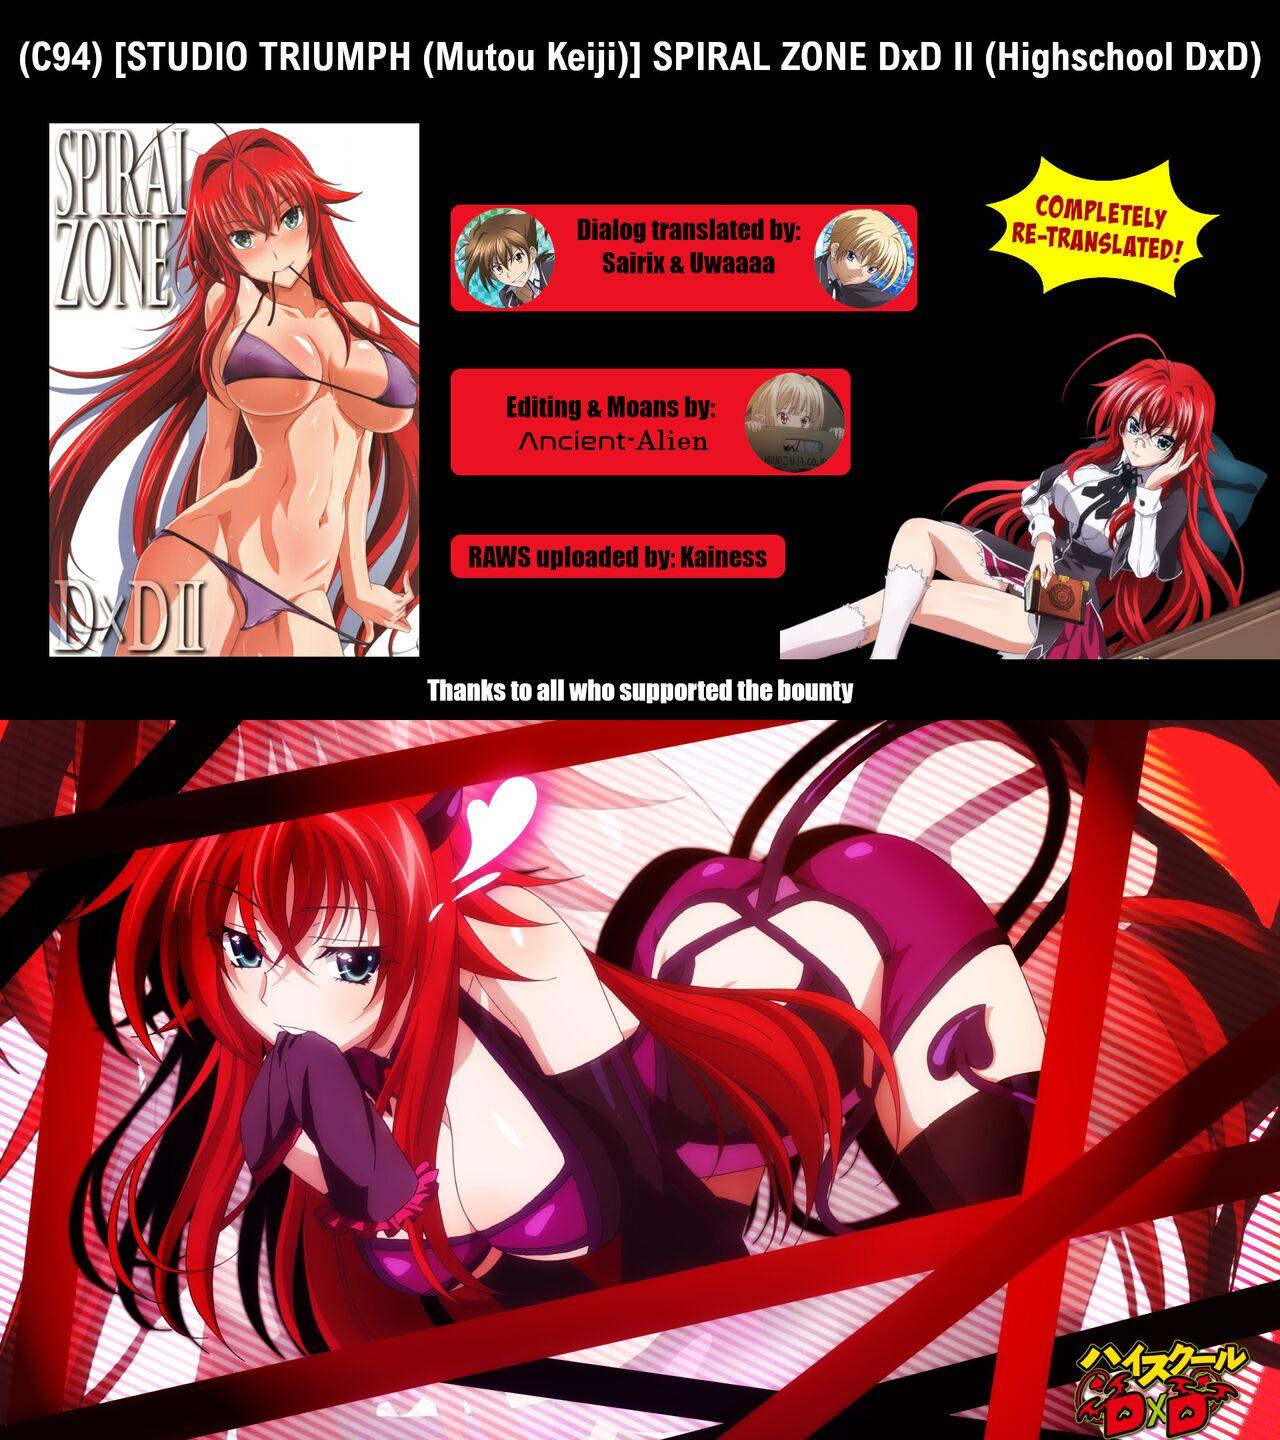 Pendeja SPIRAL ZONE DxD II - Highschool dxd Rimjob - Page 27